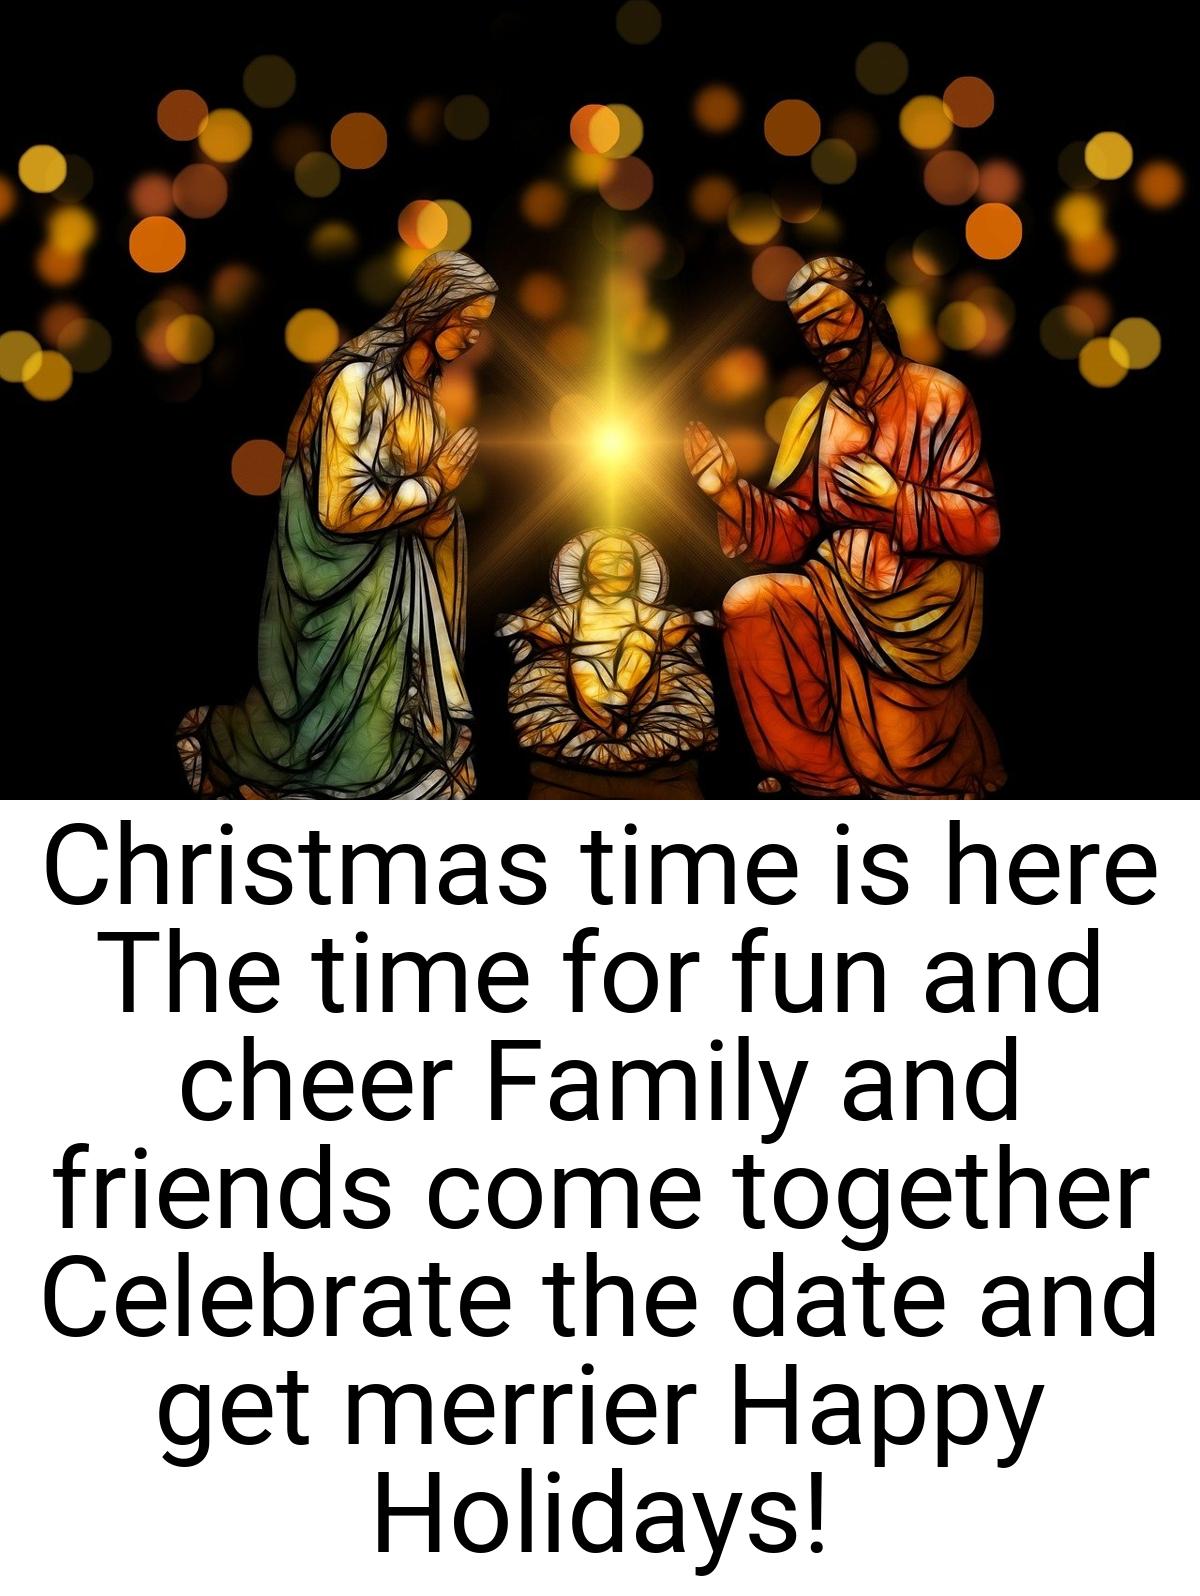 Christmas time is here The time for fun and cheer Family